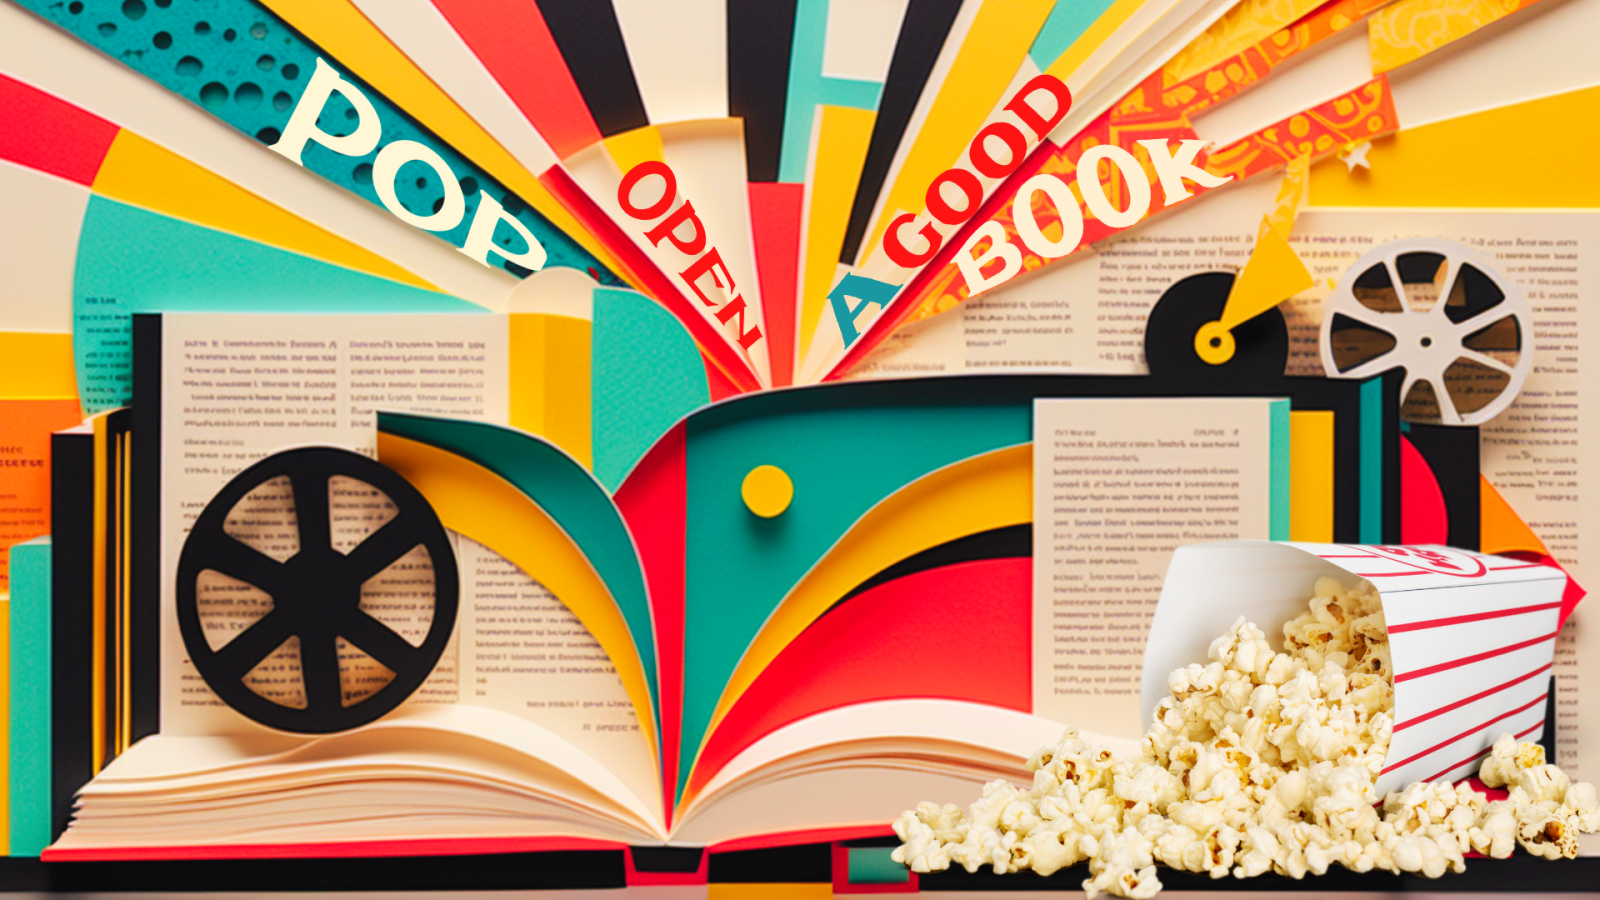 A bright graphic with a book, film reels, and popcorn with the text: "Pop Open a Good Book."